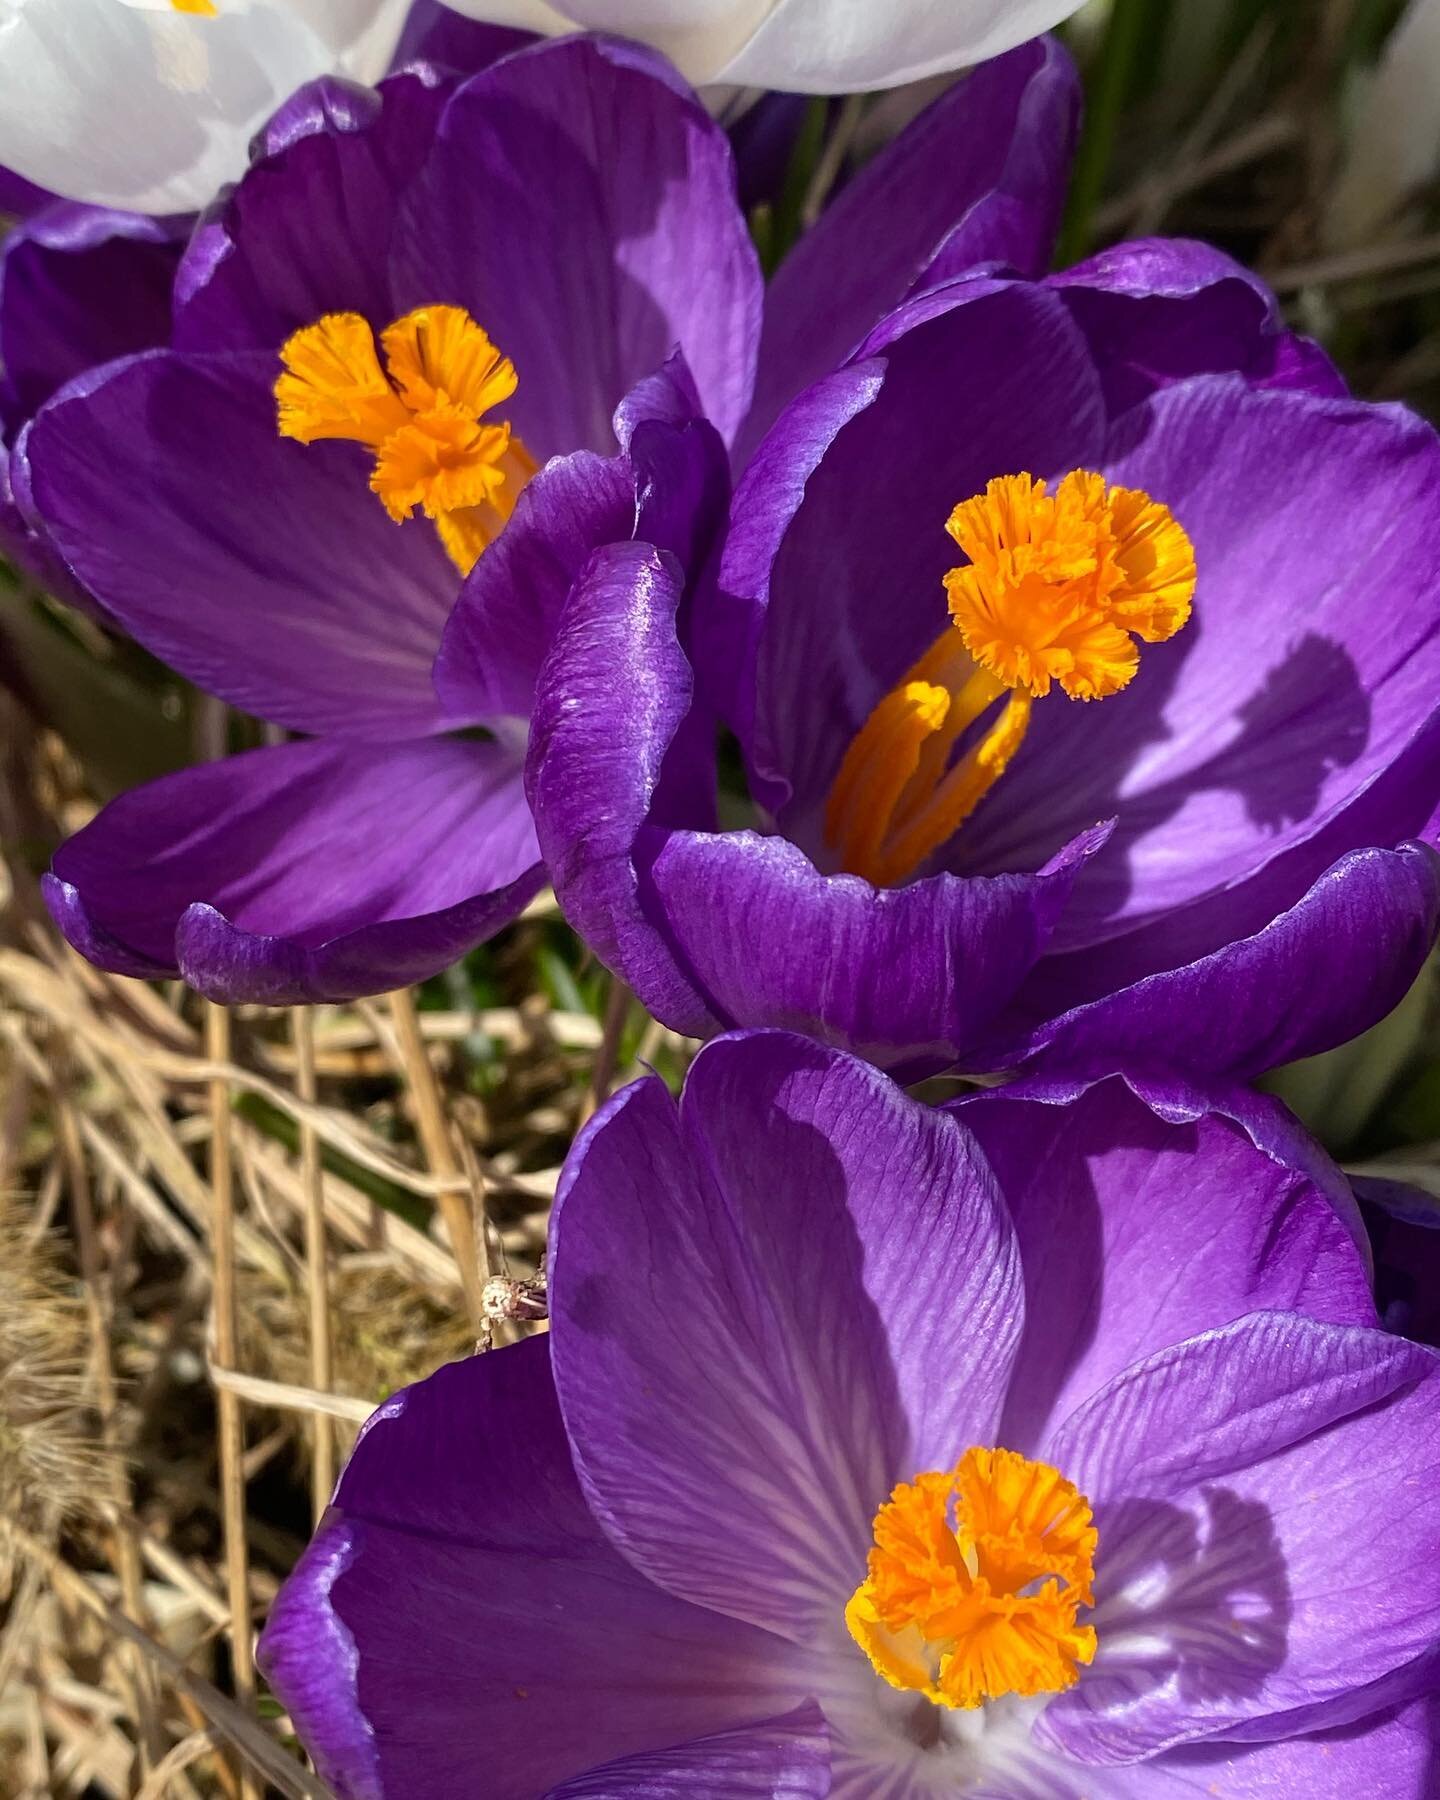 so good to see some COLOR 🤩! what&rsquo;s popping up near you??

#spring #eastercolor #colors #flowers #purple #farmlife #outsideisfree #getoutside #mindfulliving #springflowers #farm #sustainableliving #colorpalette #color